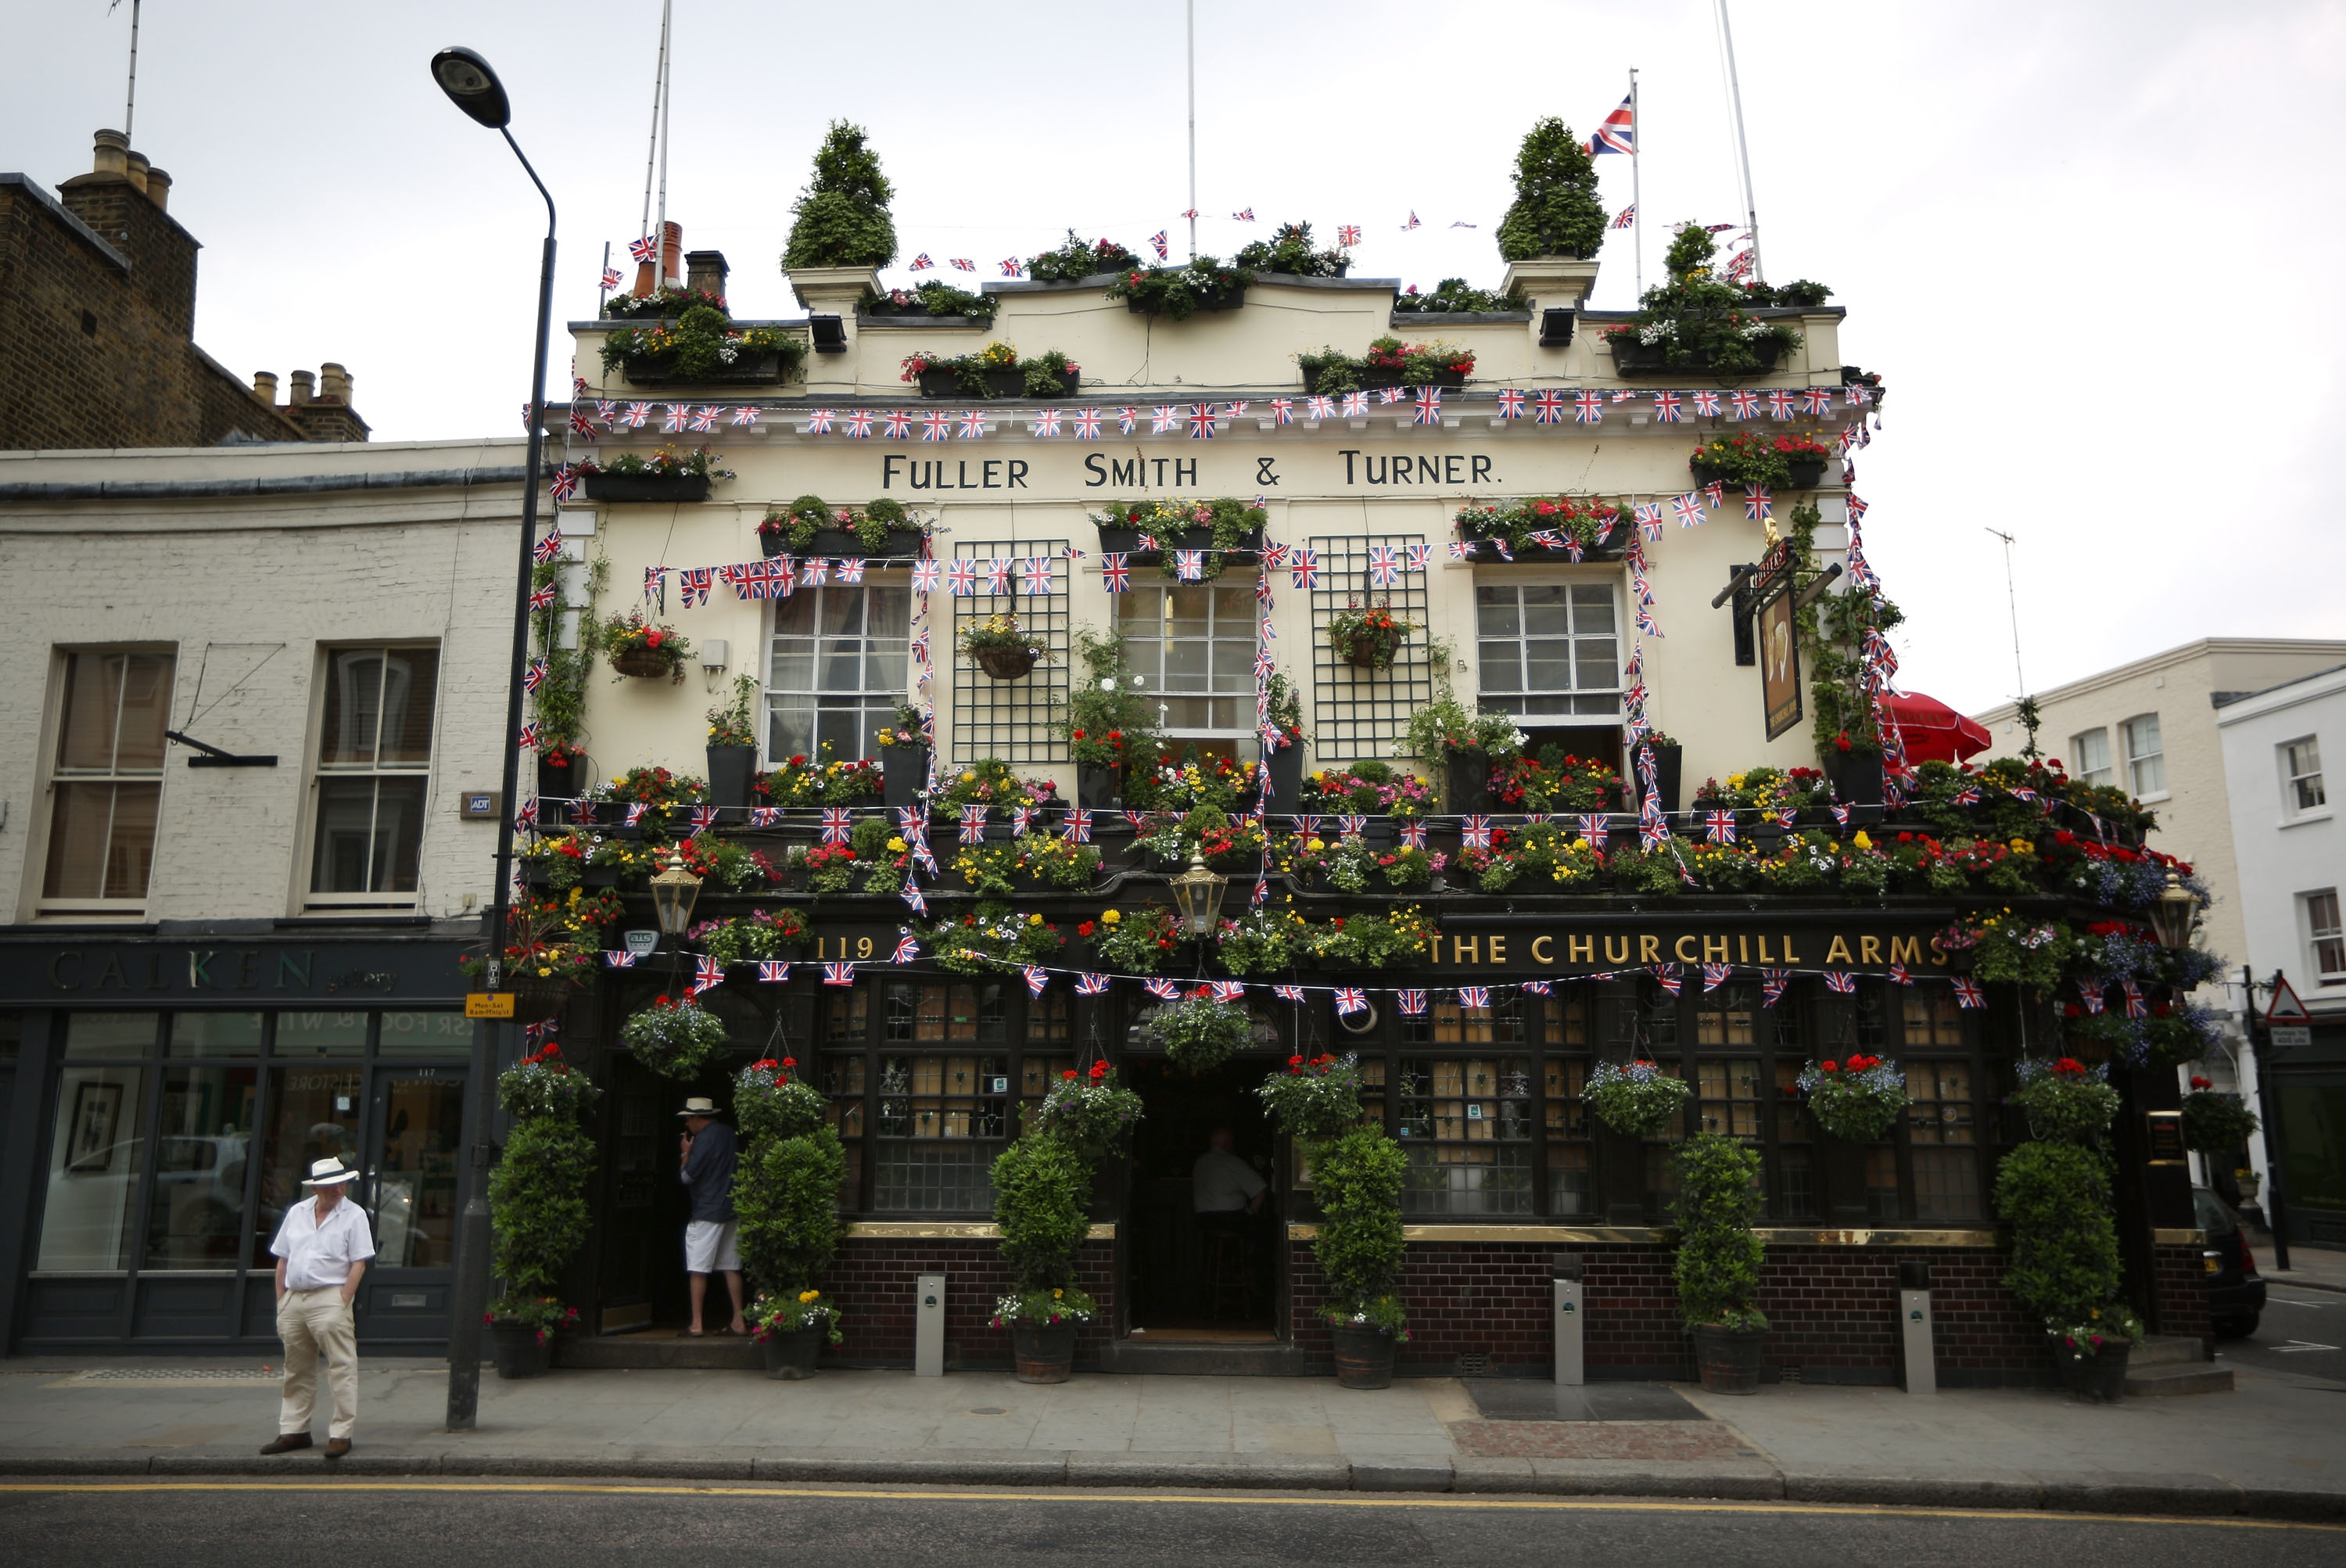 The Churchill Arms pub is decorated with Union Jack flags on May 29, 2012 in London, England. (Peter Macdiarmid—Getty Images)